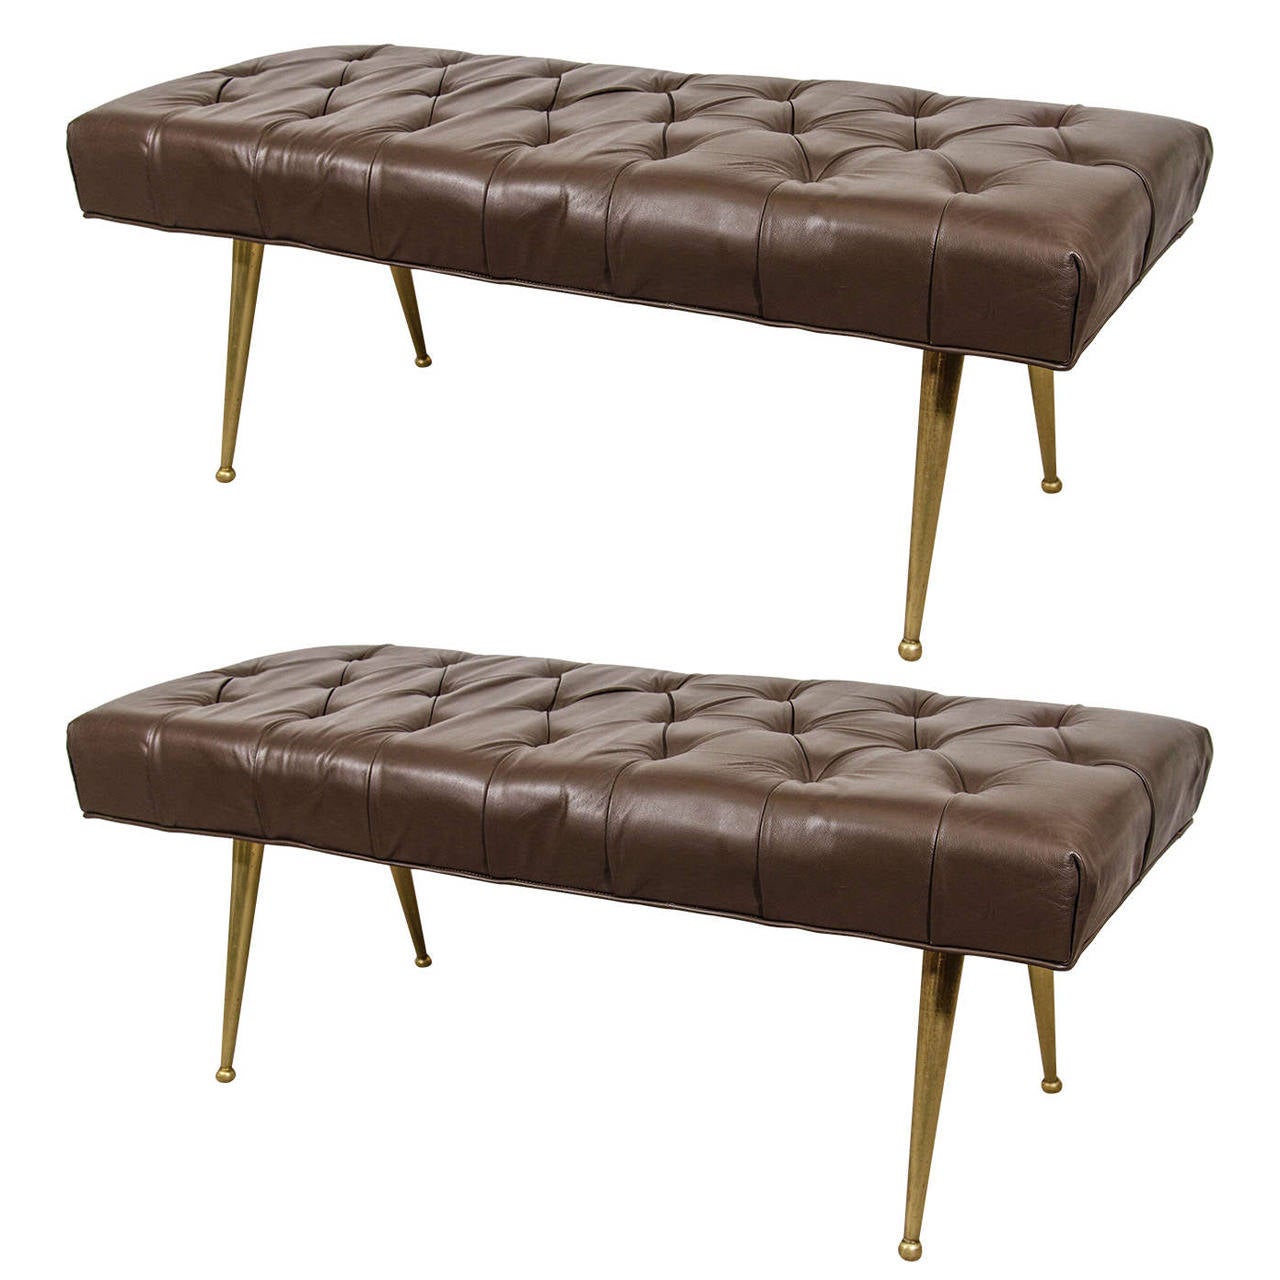 A Midcentury Pair of Italian Chocolate Color Leather Benches